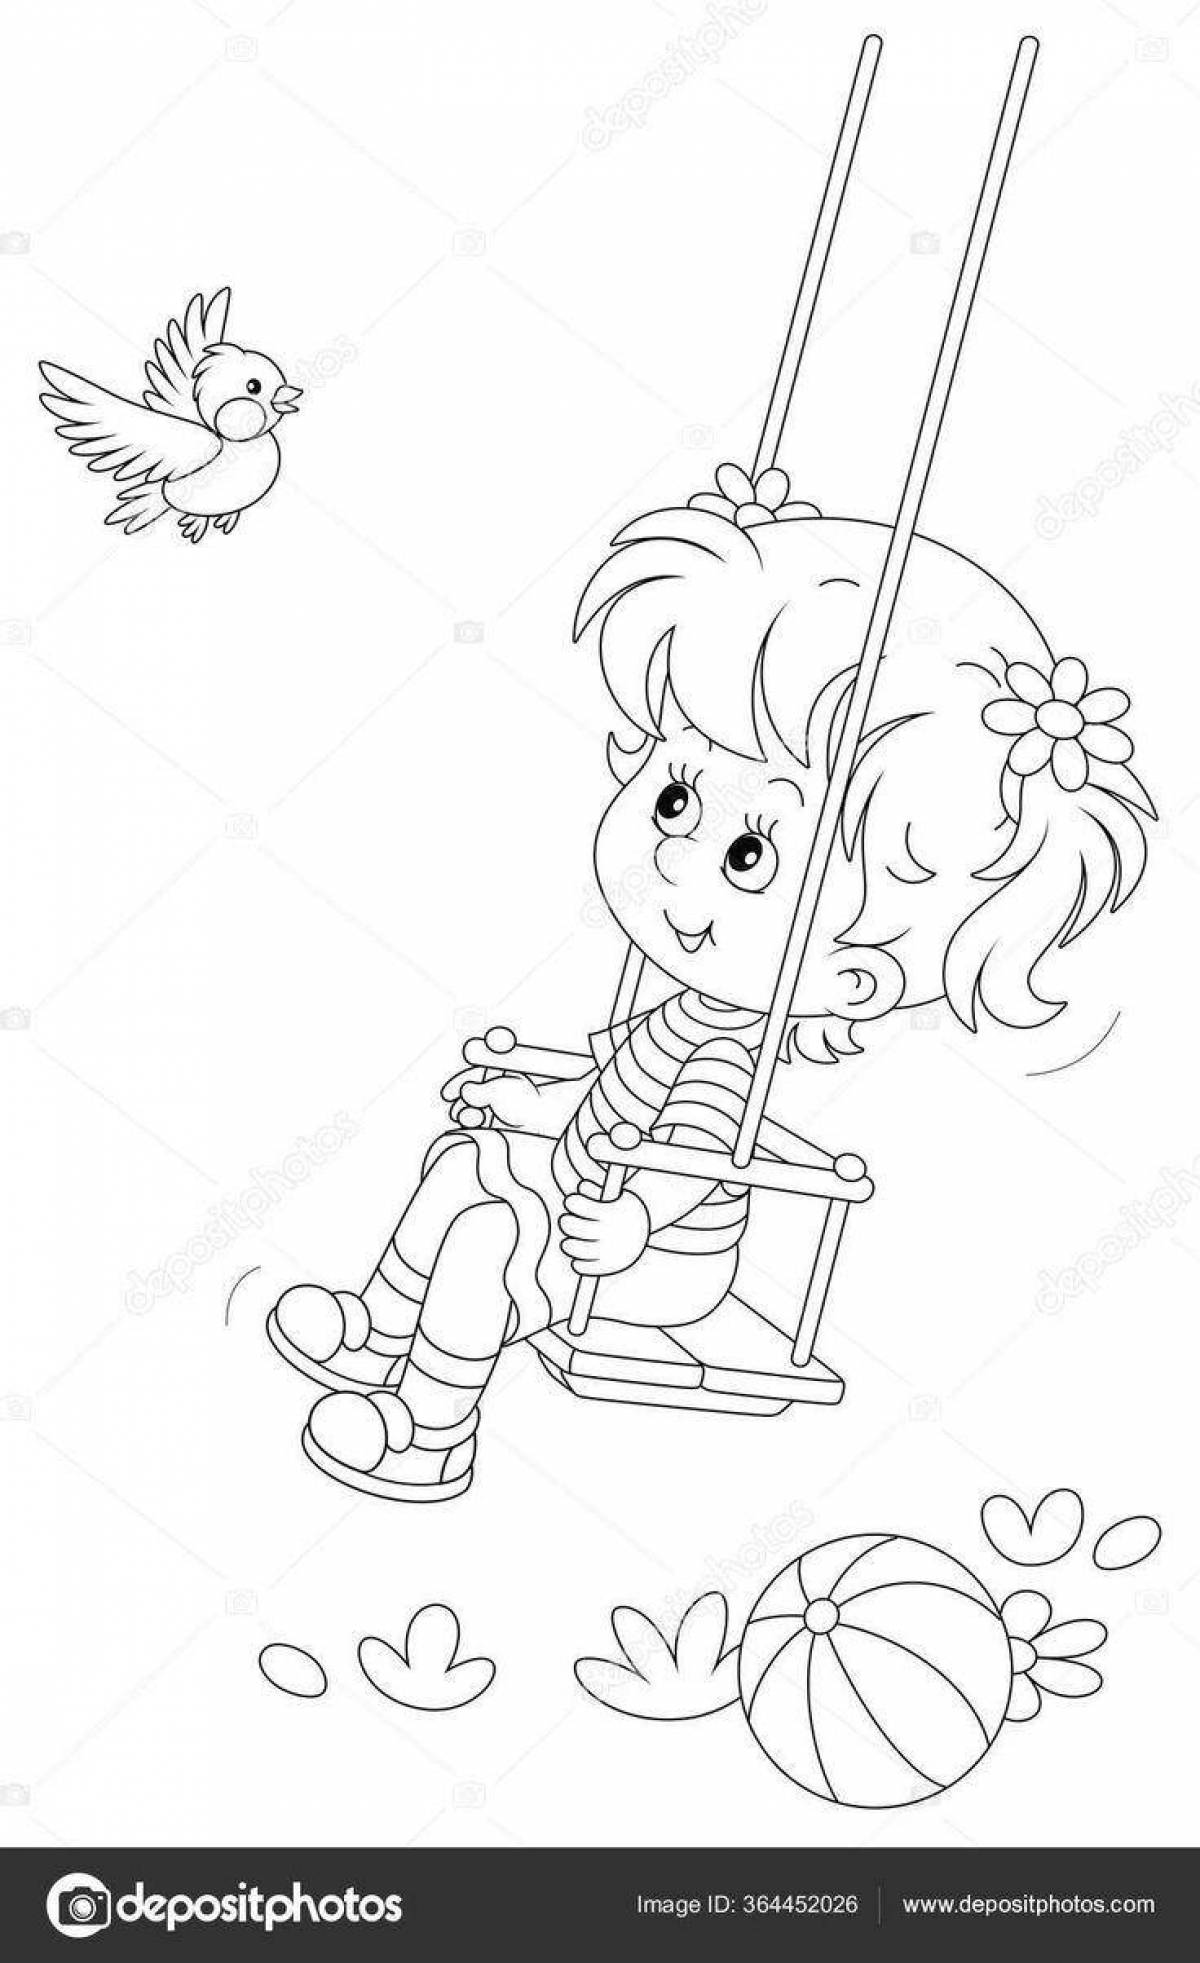 Coloring animated girl on a swing